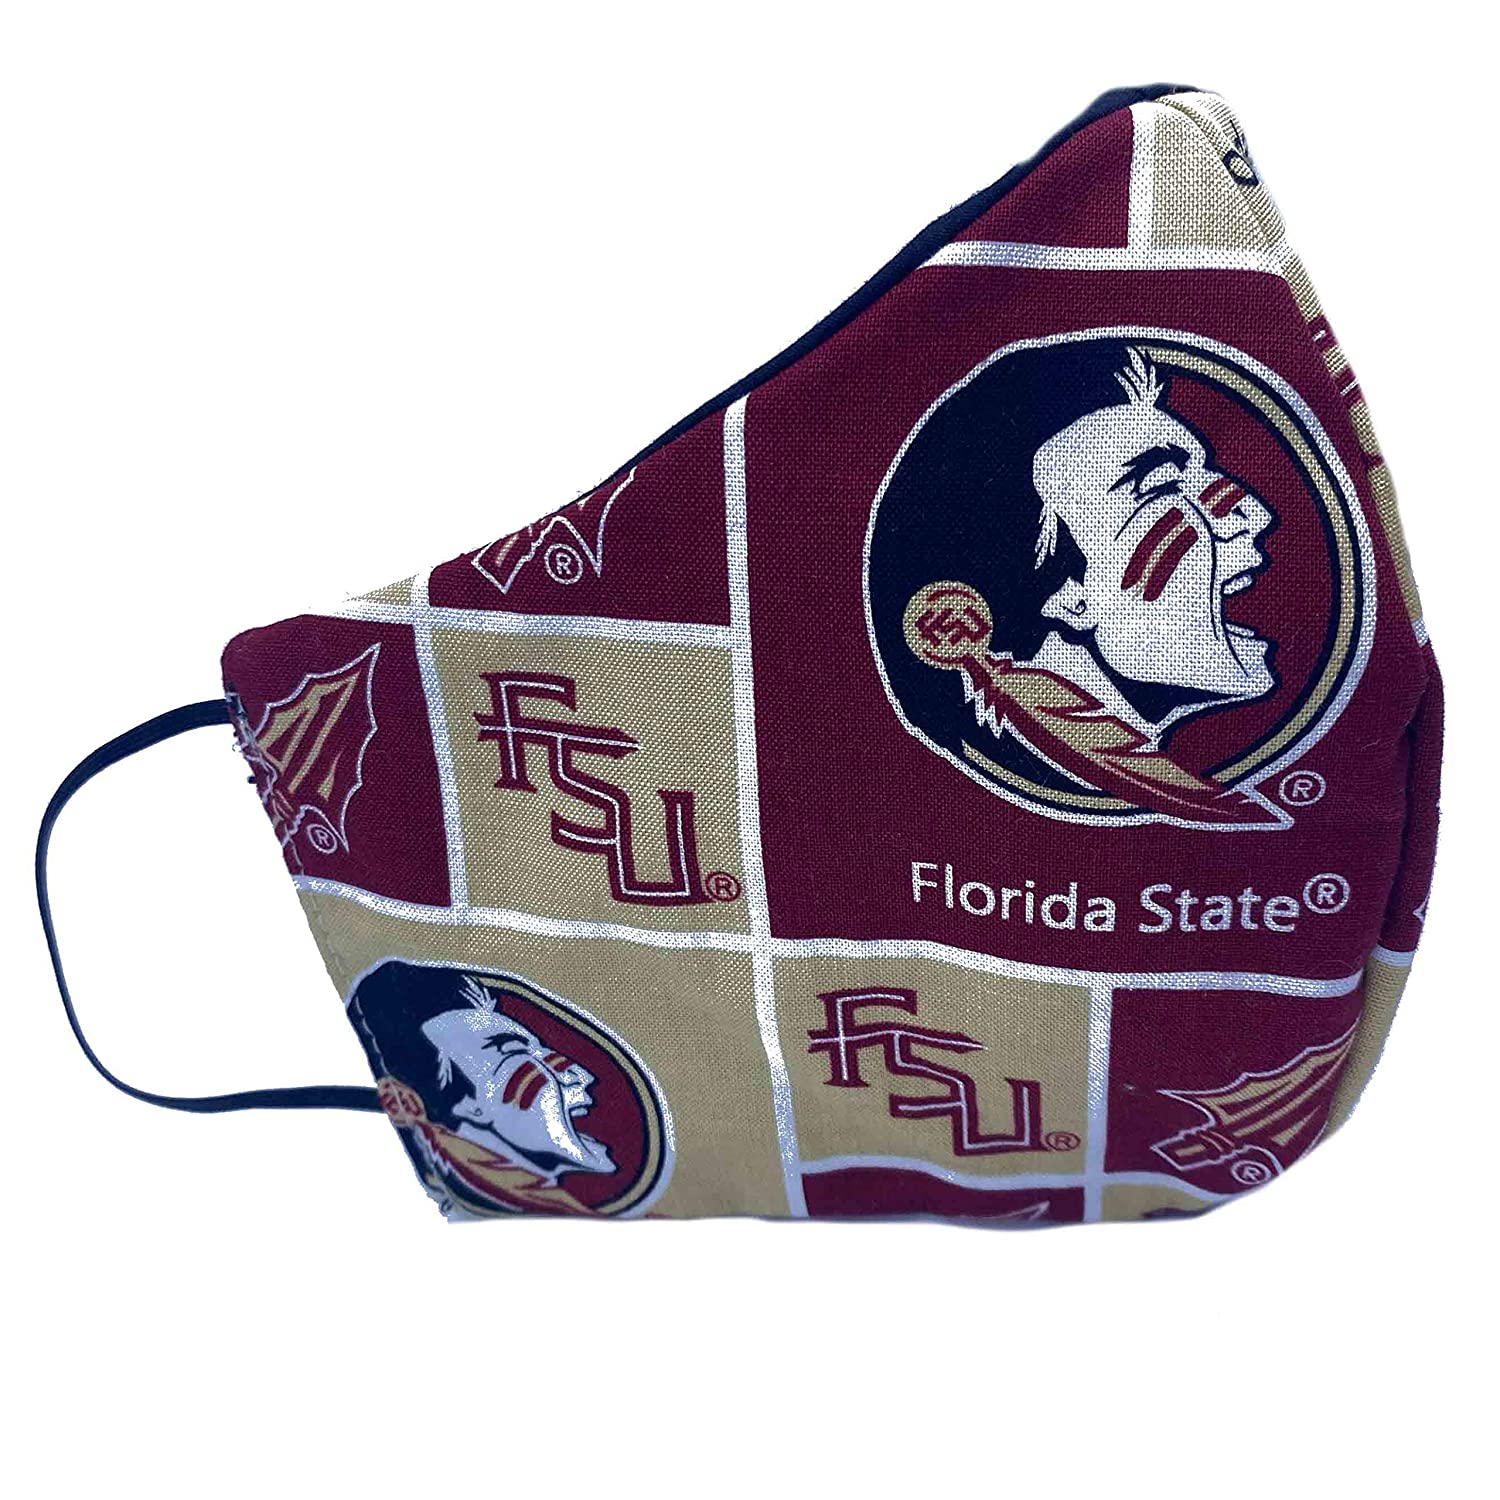 The Seminoles FSU Florida State University Face Mask 100% Cotton High Quality Mouth and Nose Cover